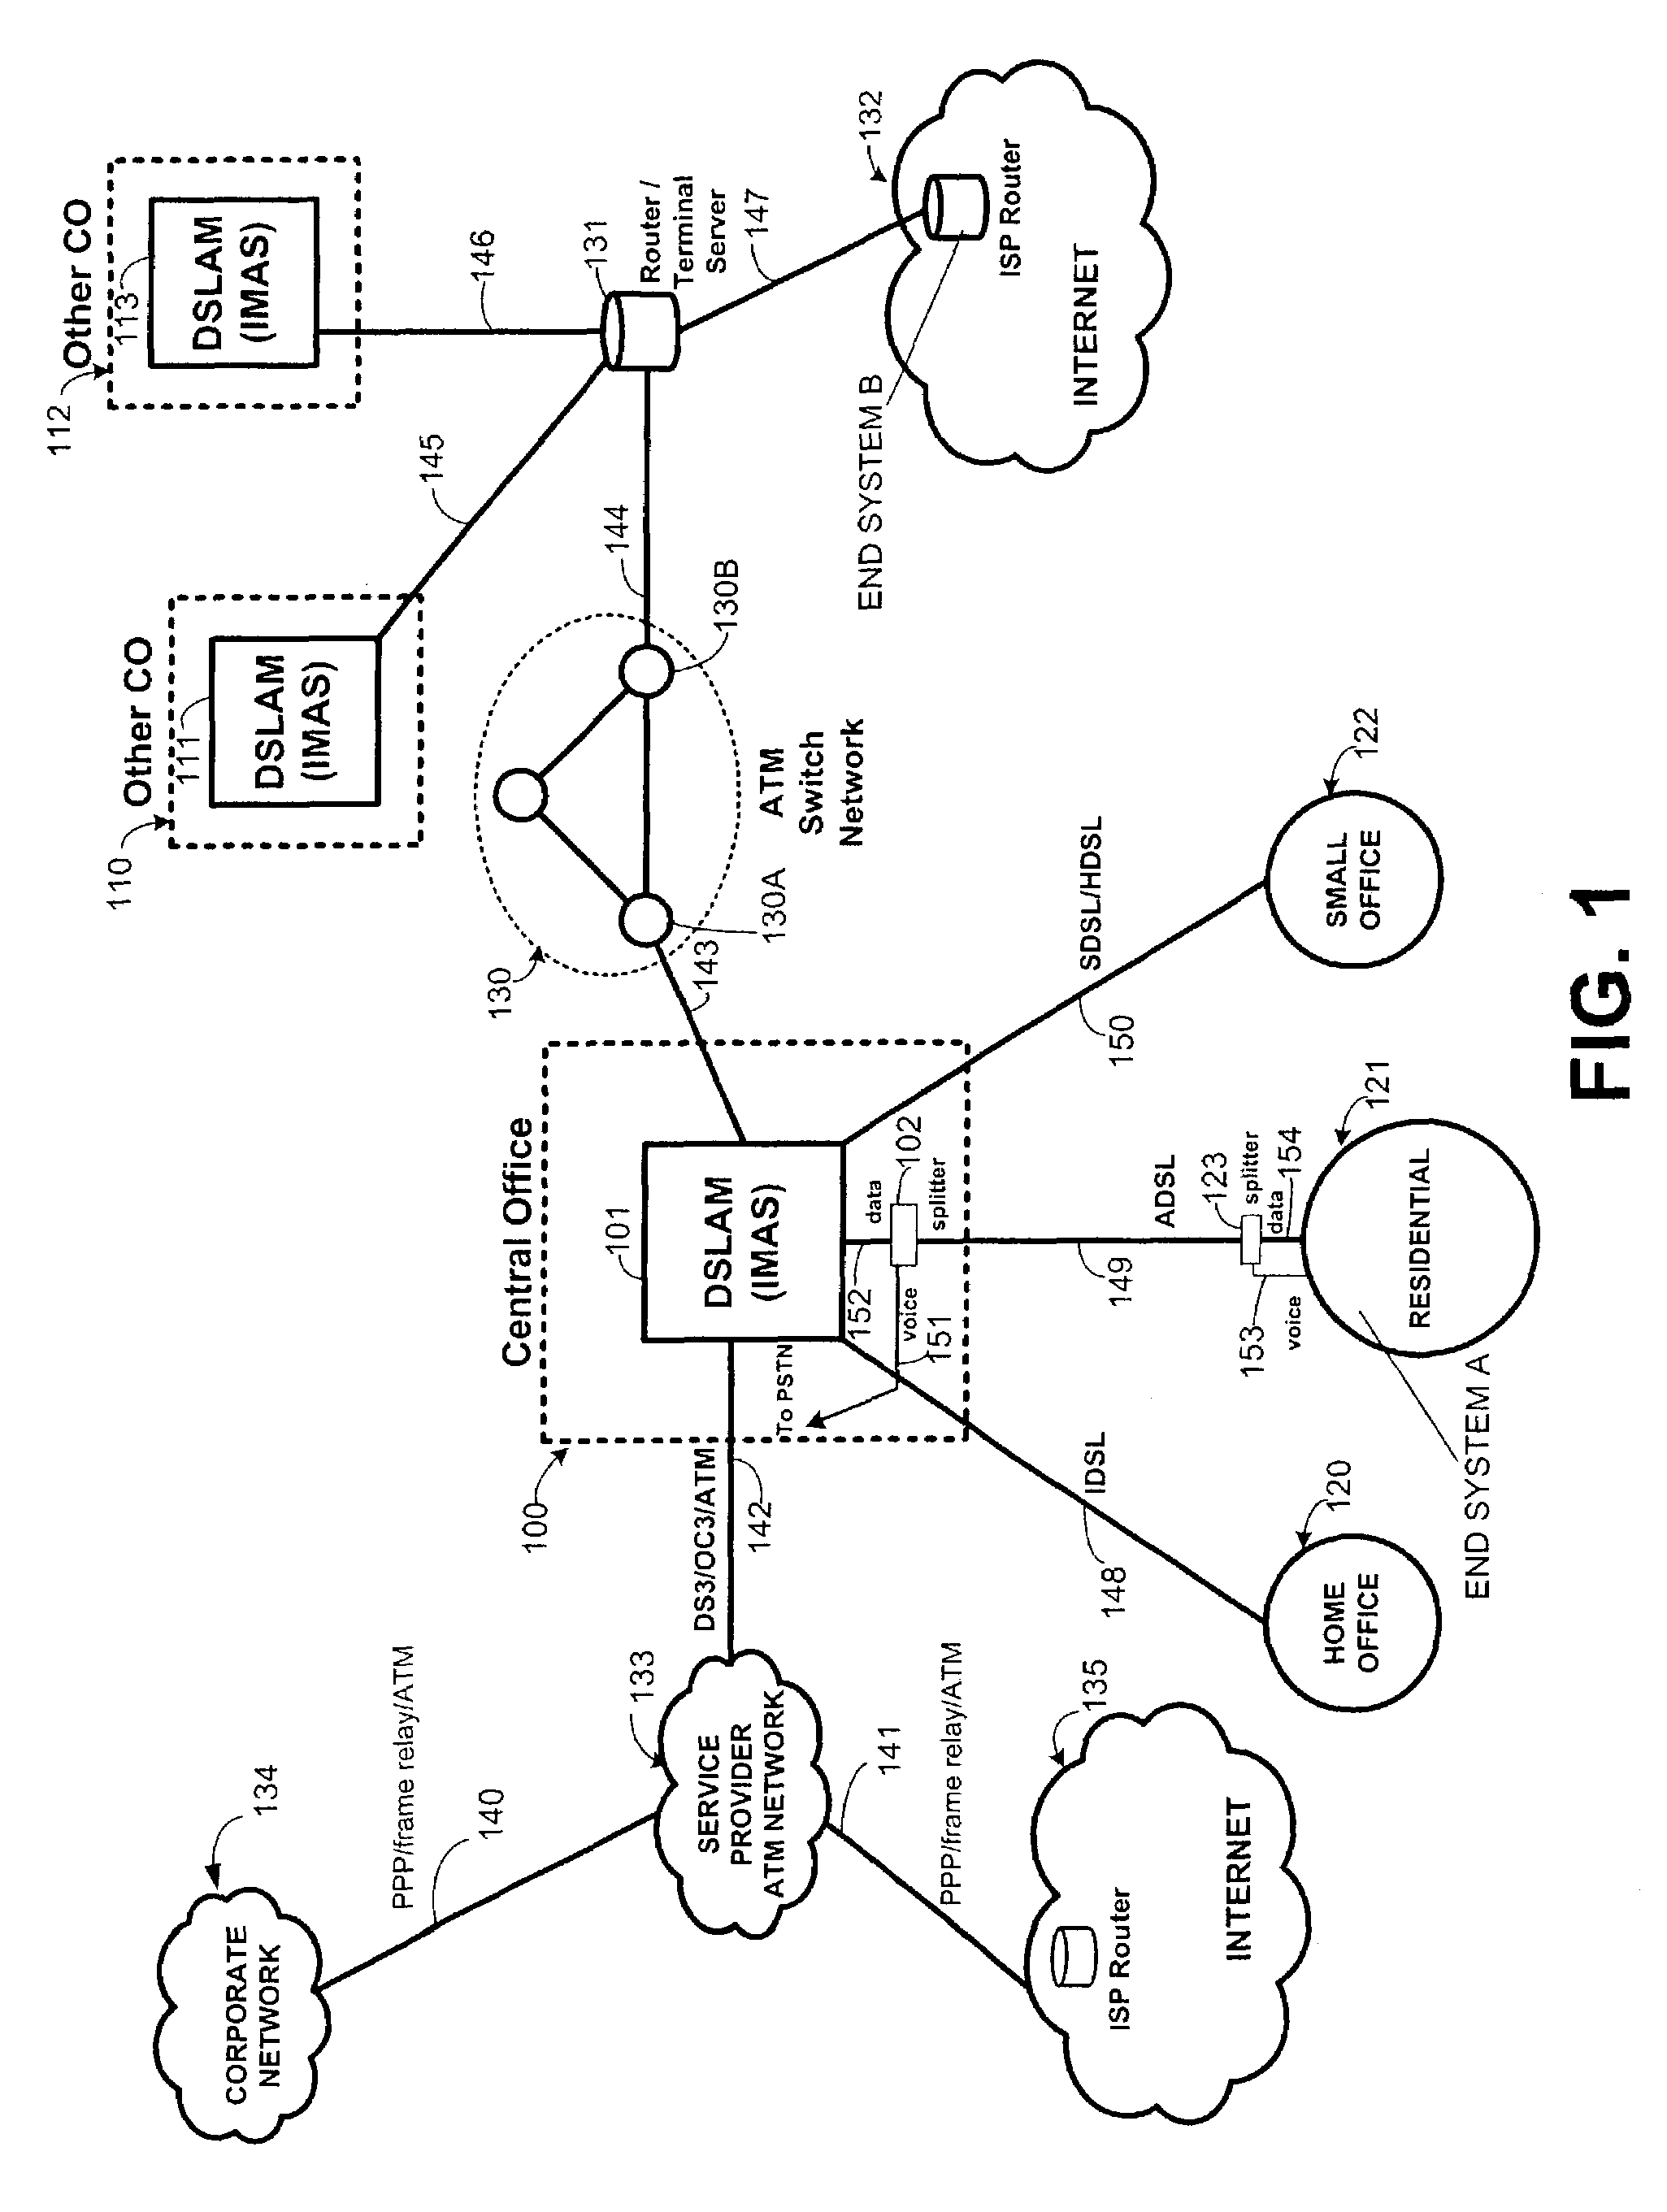 SVC signaling system and method